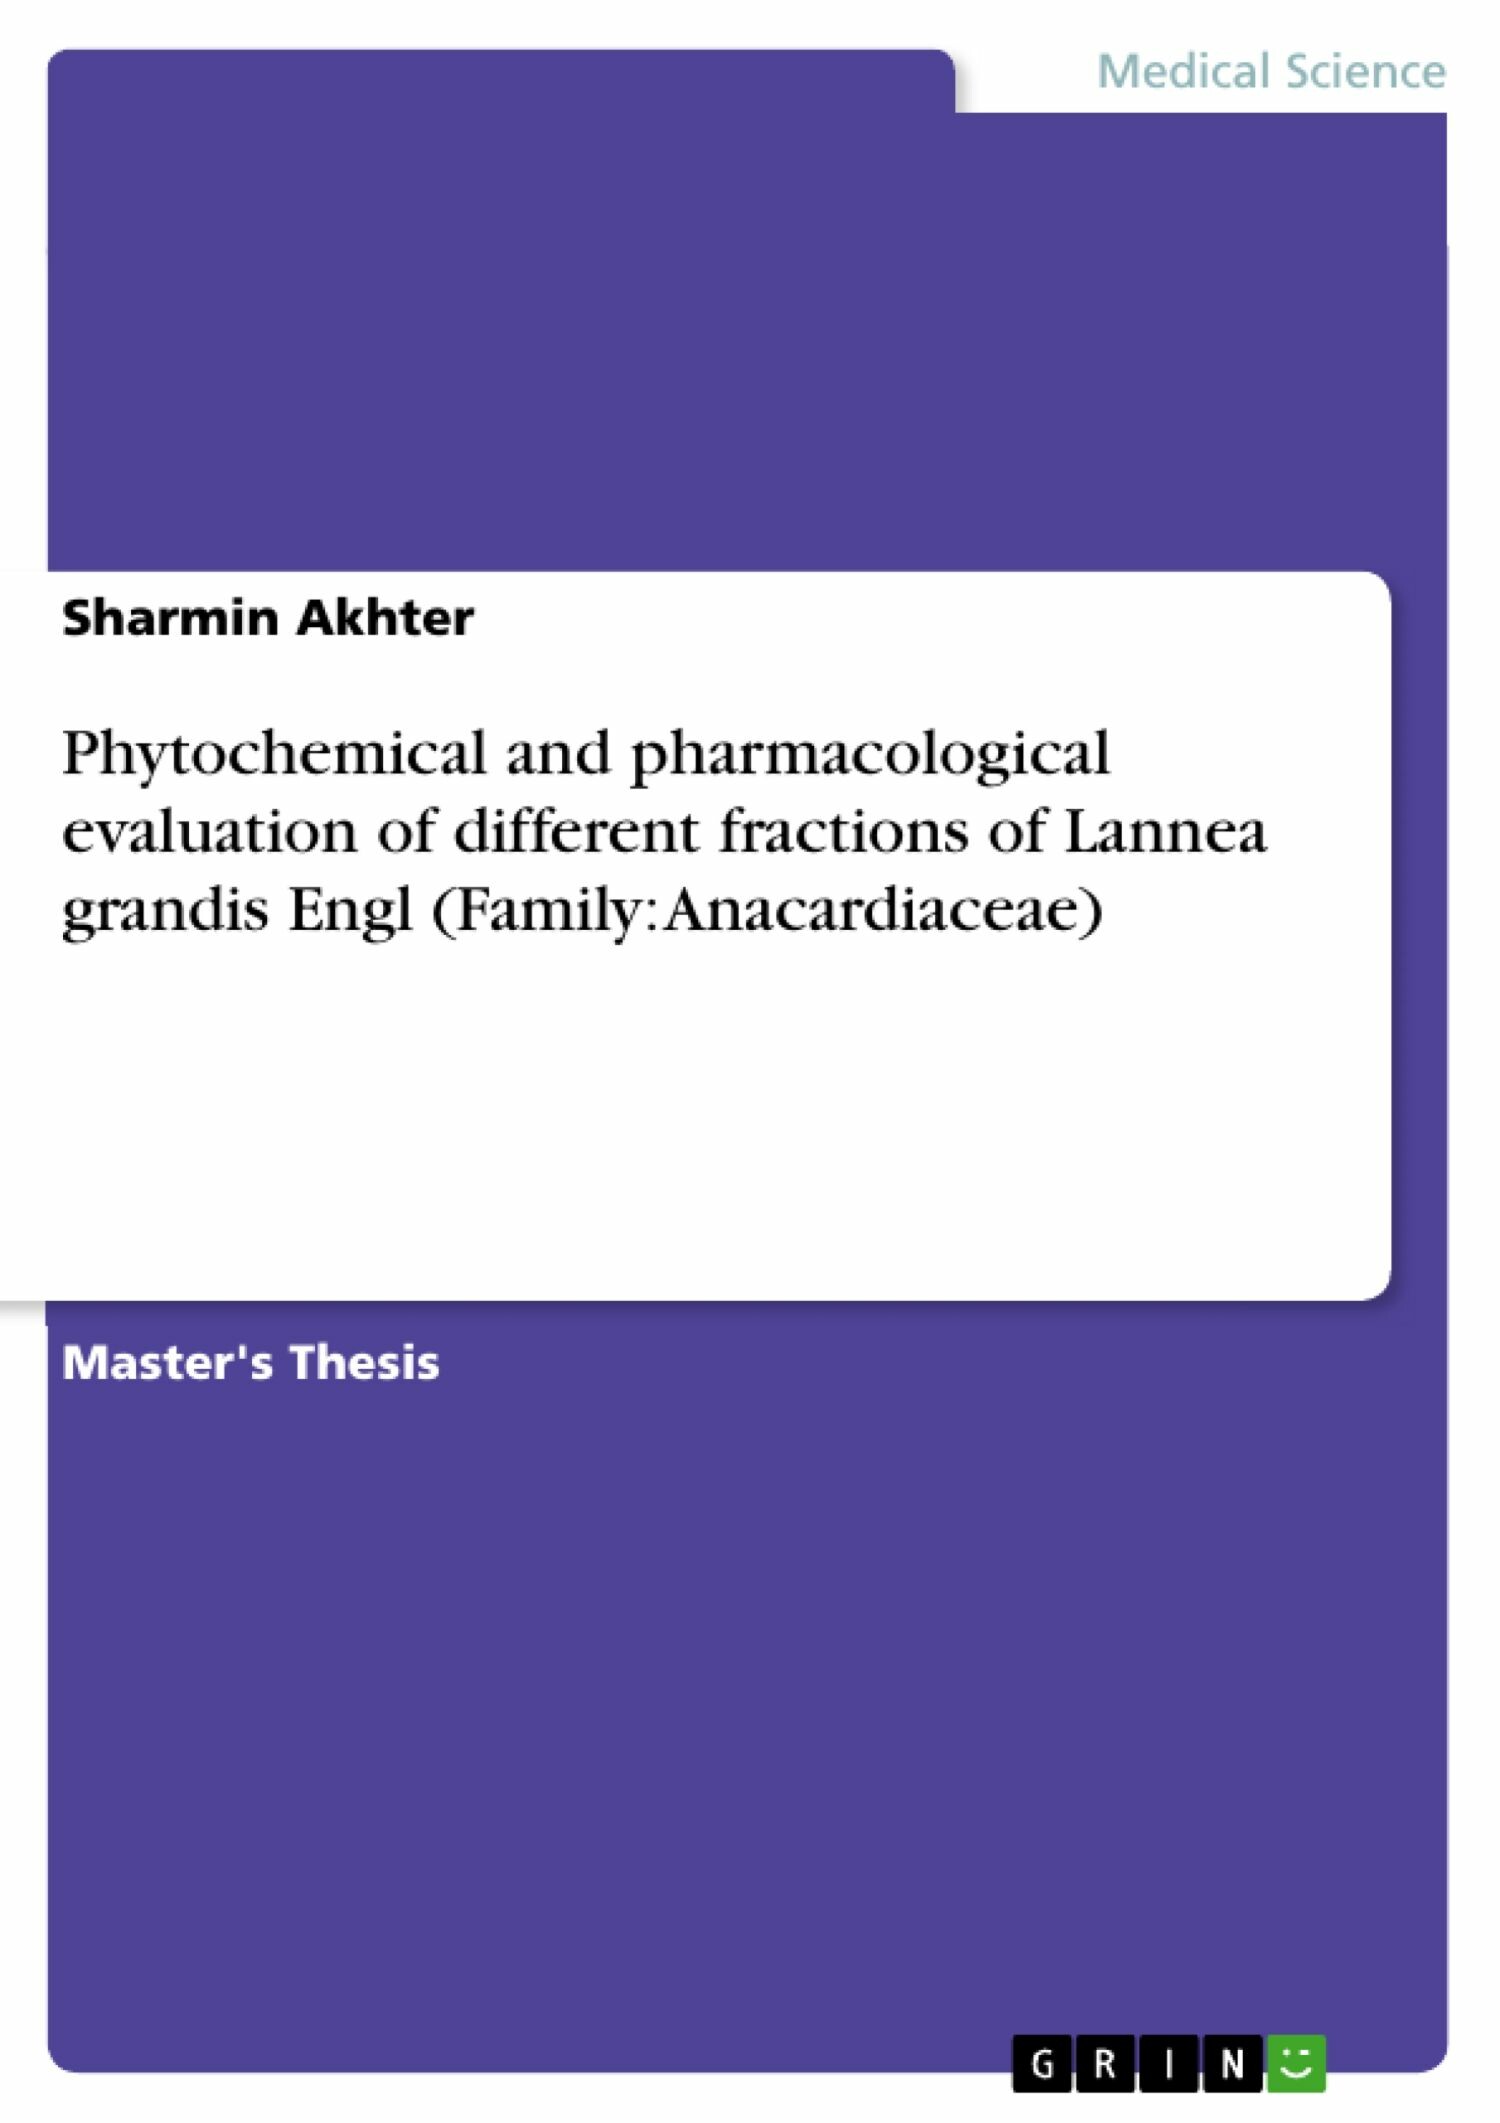 Phytochemical and pharmacological evaluation of different fractions of Lannea grandis Engl (Family: Anacardiaceae)